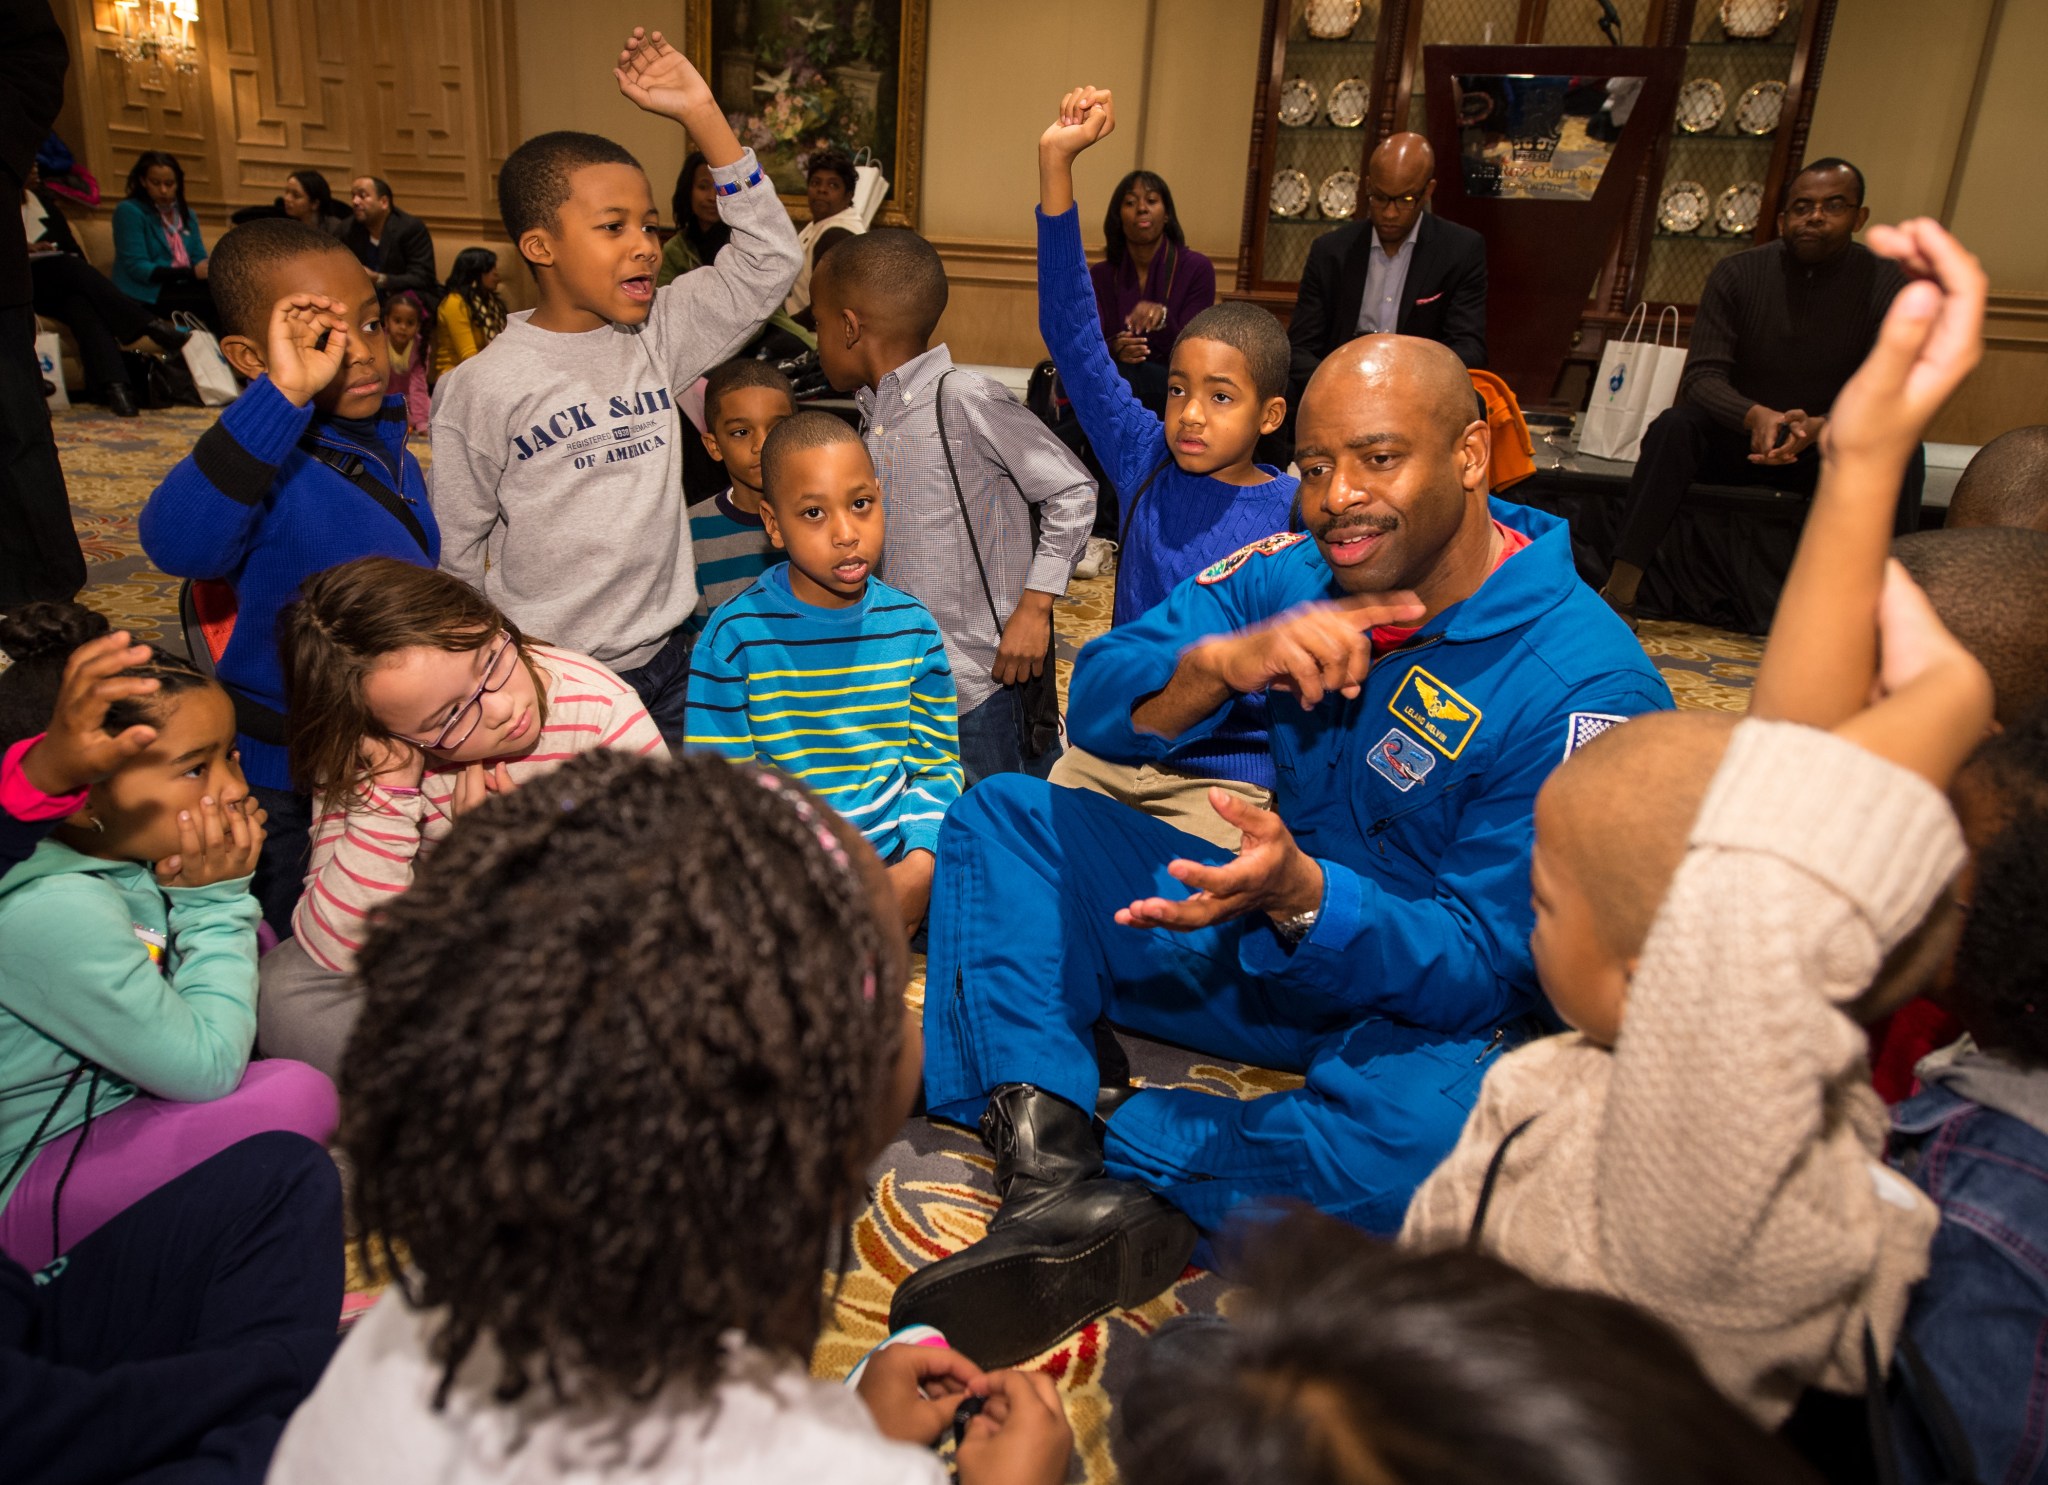 Former NASA Astronaut, Leland Melvin, talks to school children during an Science, Technology, Engineering, and Math (STEM) education event.